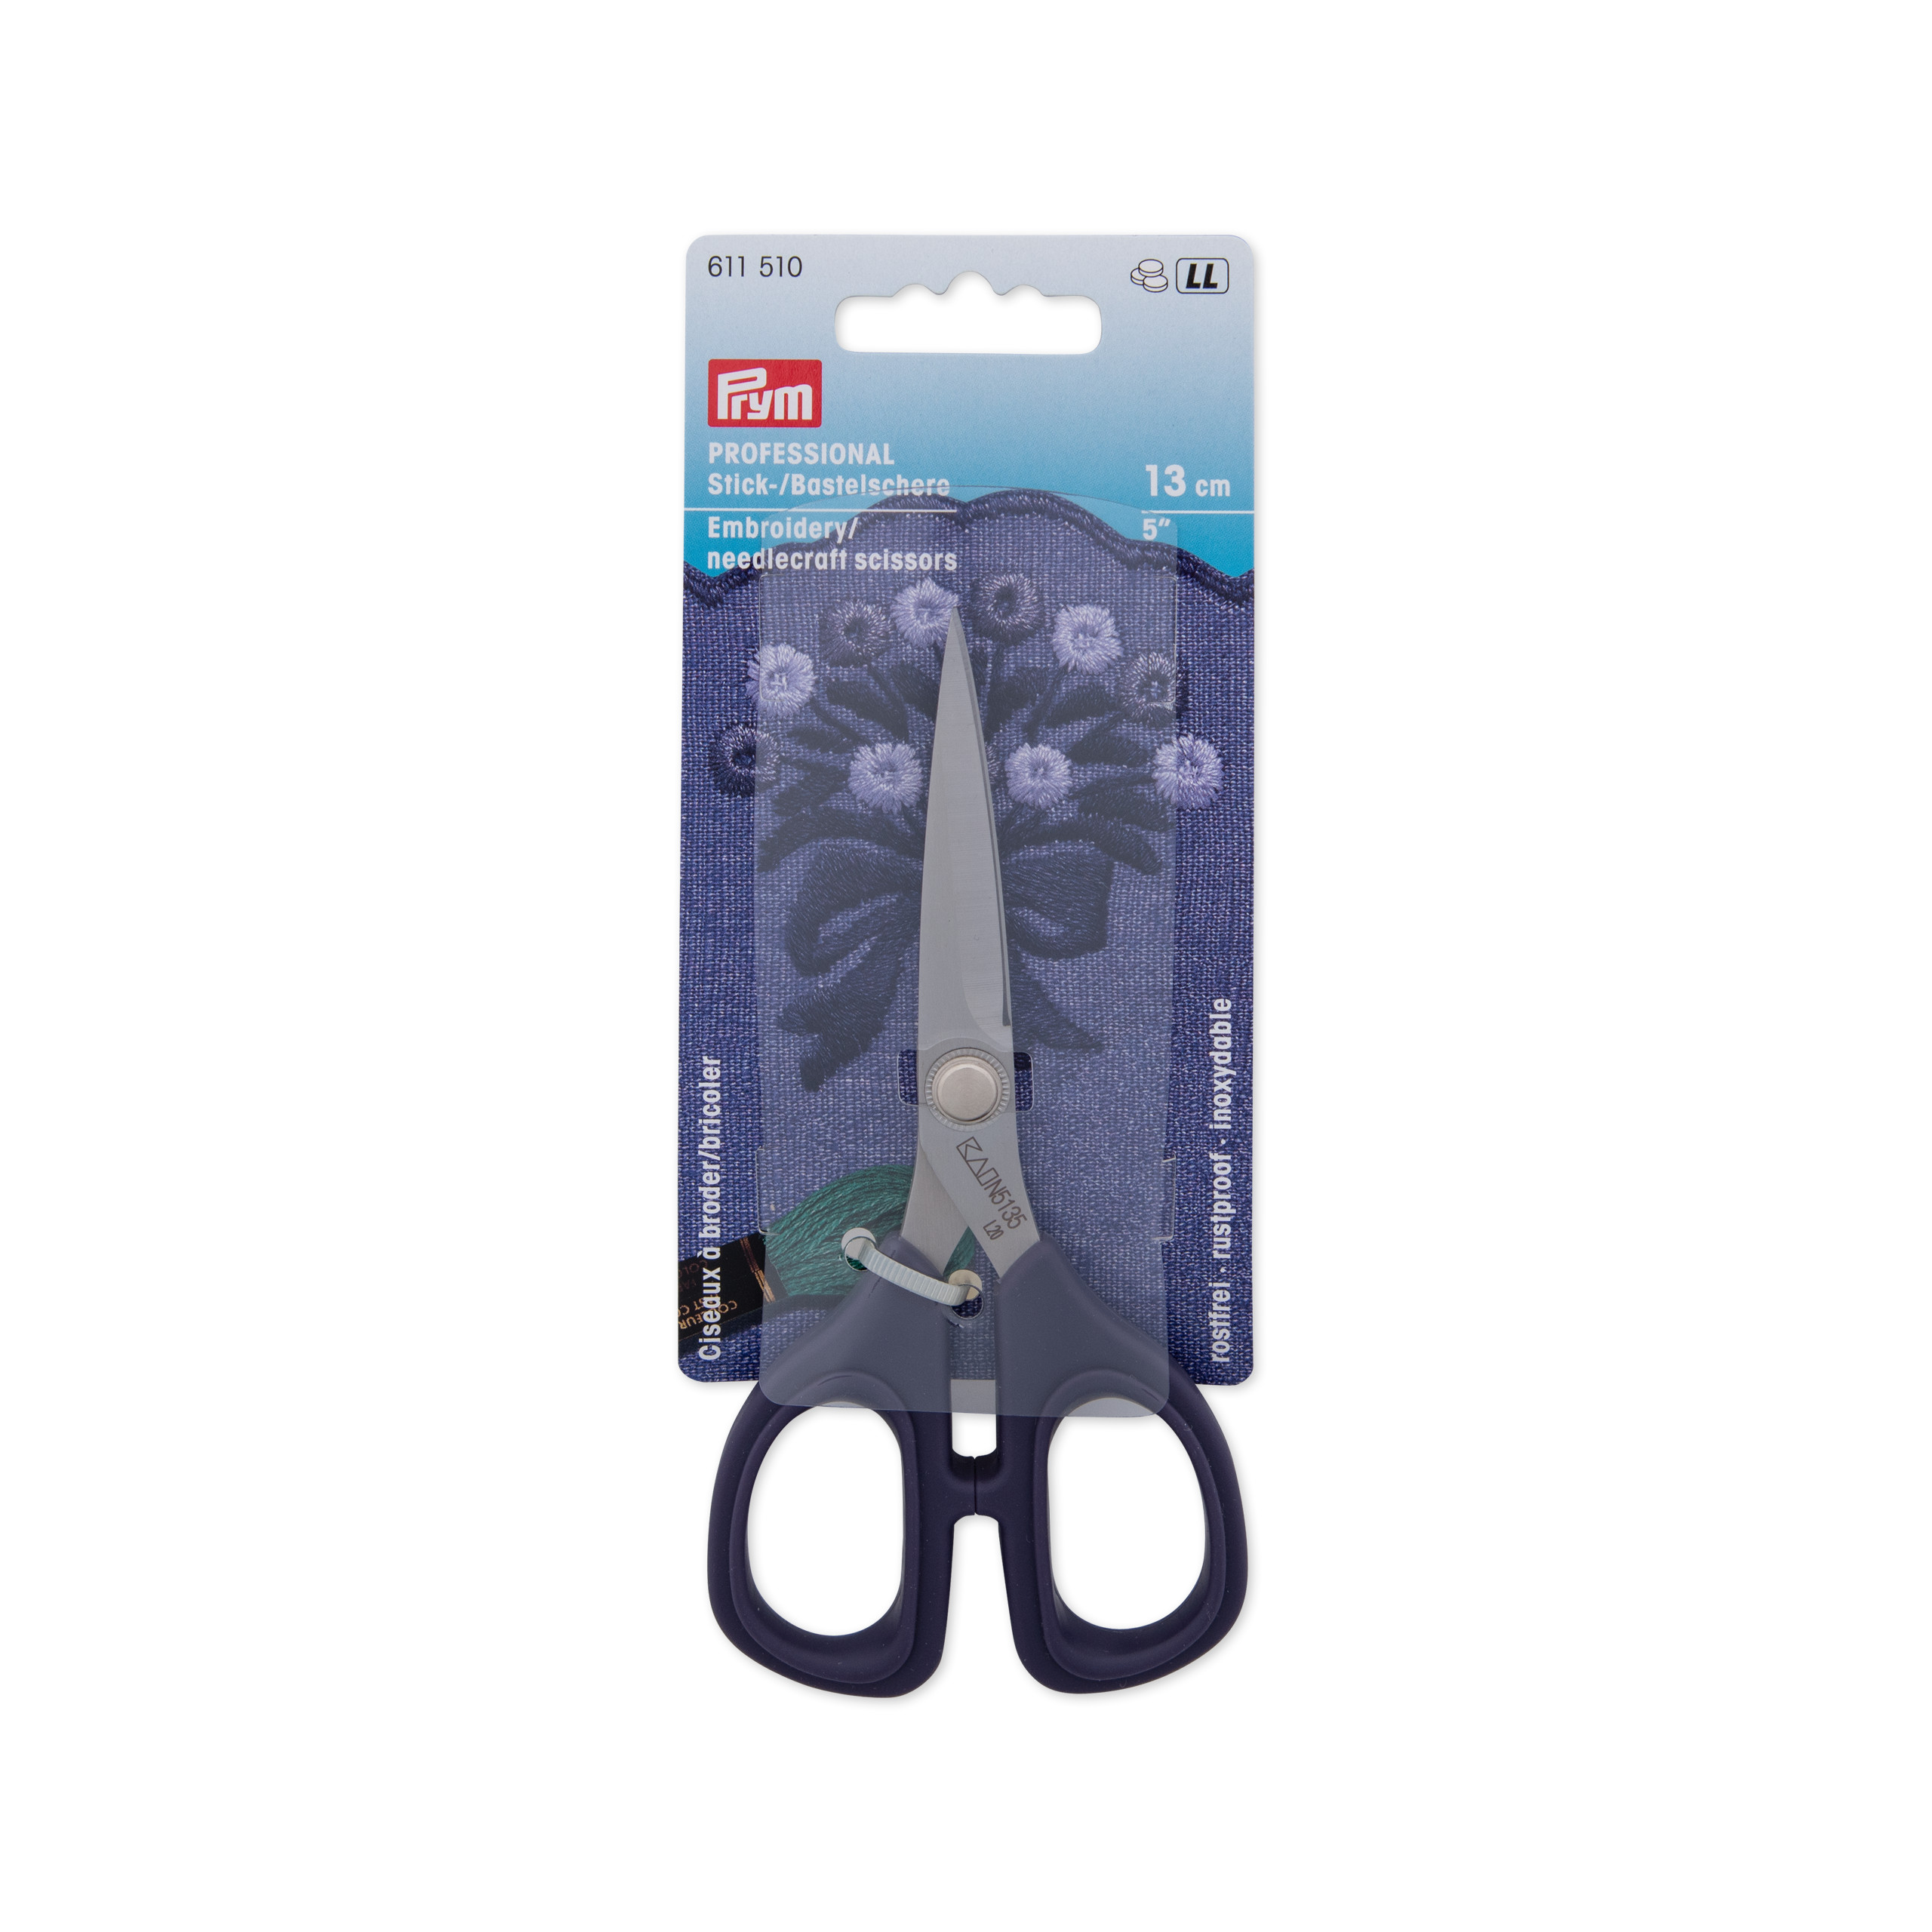 Professional Embroidery and Needlecraft Scissors HT 5'' 13 cm, 1 St